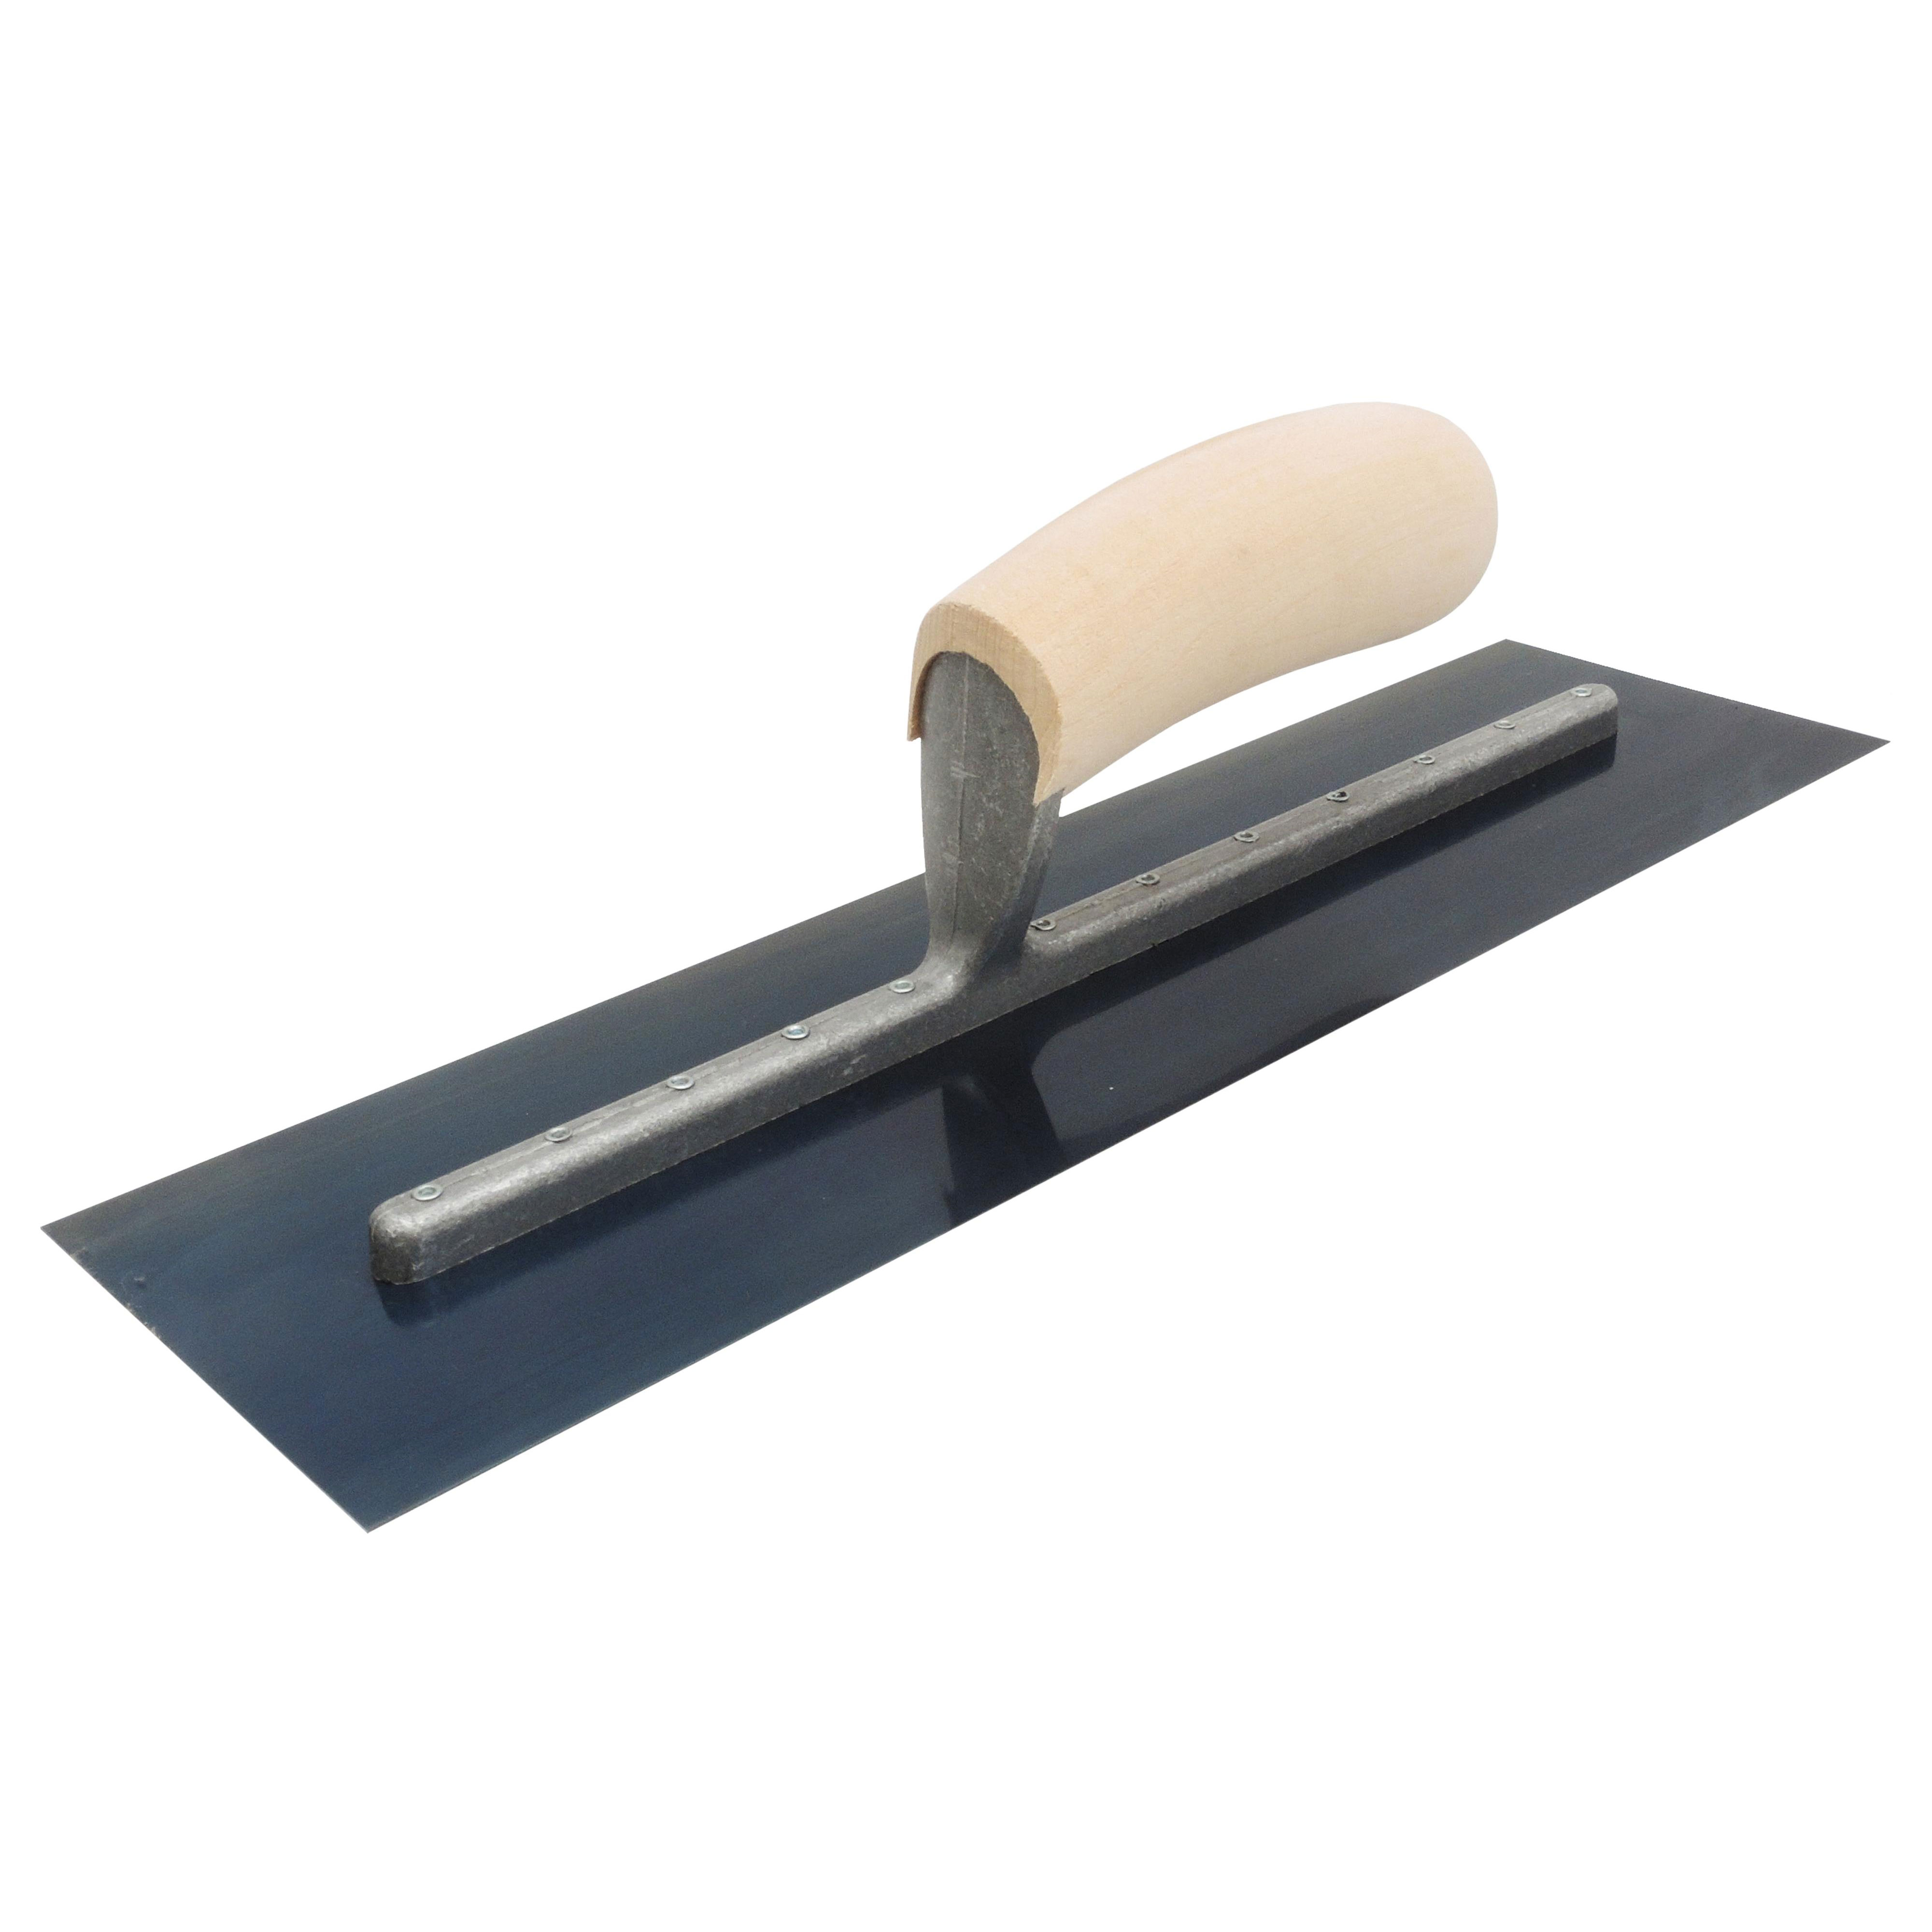 Marshalltown FT104B 10in x 4in Blue Steel Finishing Trowel with Wood Handle FT104B